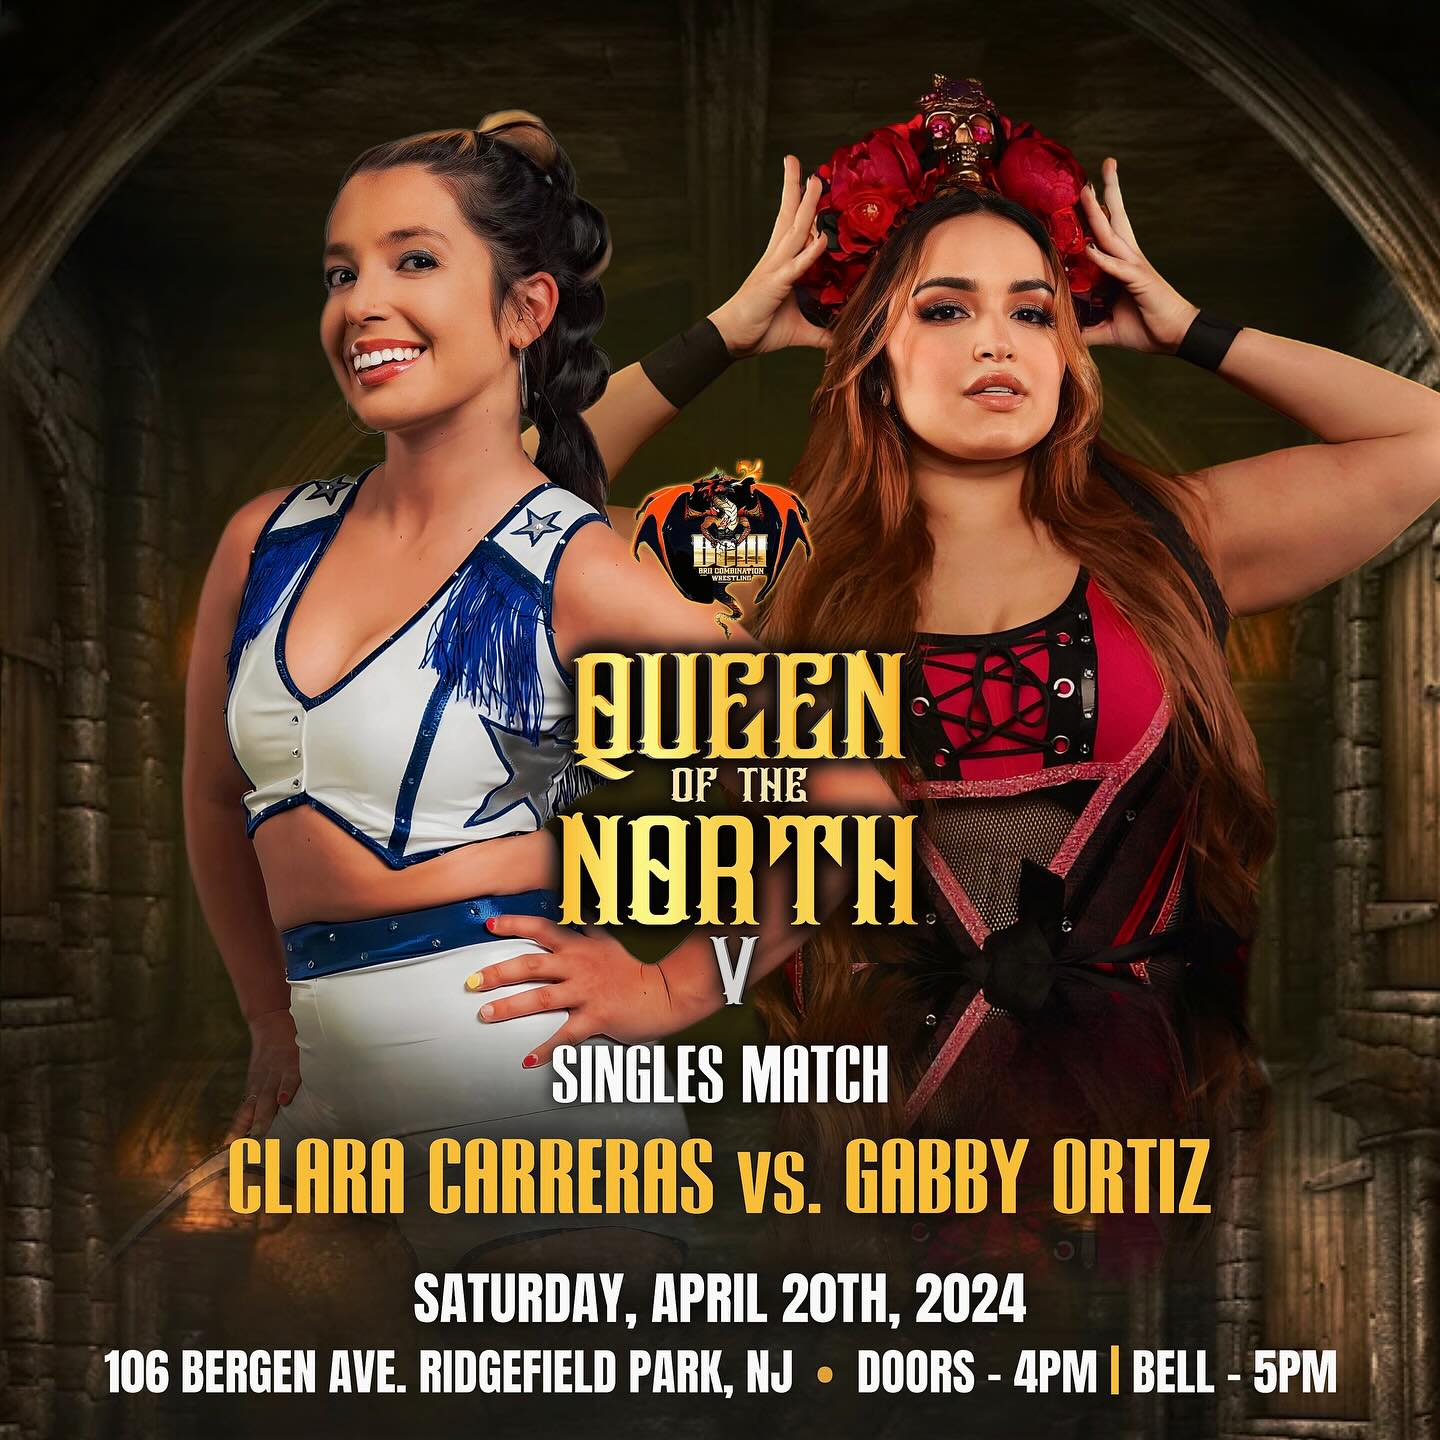 You might want to keep your solar eclipse glasses for this one! Two bright stars go head-to-head at Queen of the North V 🔥😎

@gabbity makes her return to BCW to face the debuting @lachicacarreras! Don’t miss out! Click the link in the bio to get your tickets today 🎟️🔗

#prowrestling #womenswrestling #indywrestling #njwrestling #professionalwrestling #prowrestler #womenswrestler #aew #tnawrestling #wweraw